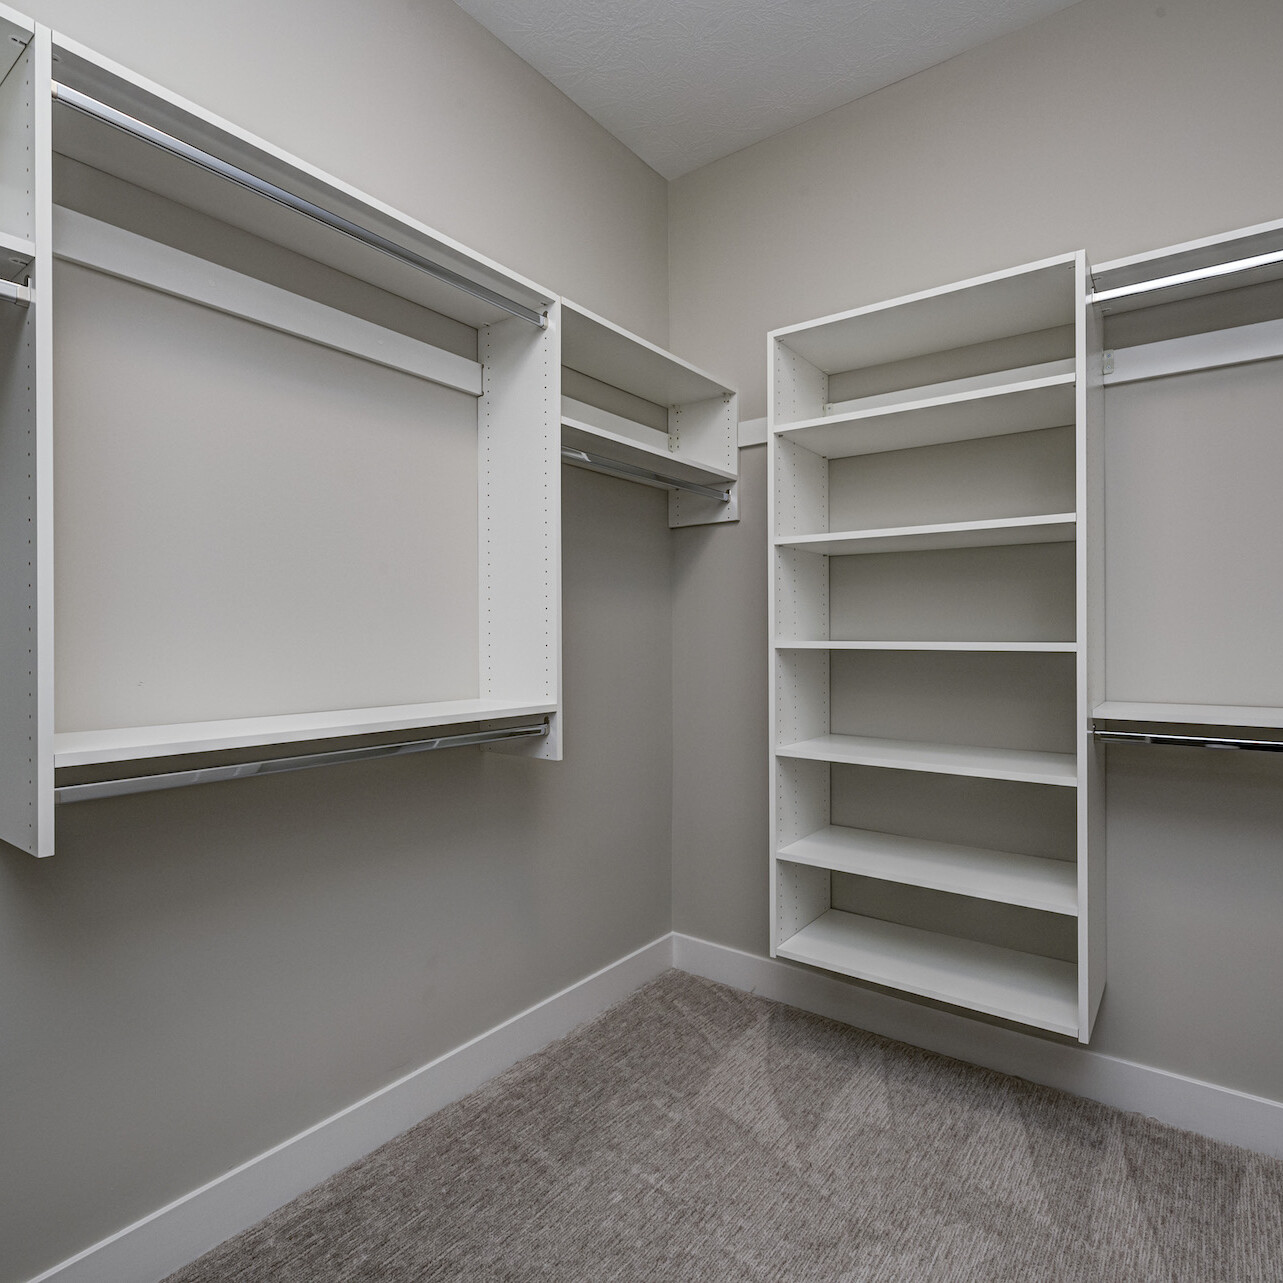 A walk-in closet with shelves and drawers, perfect for Custom Homes Westfield Indiana.